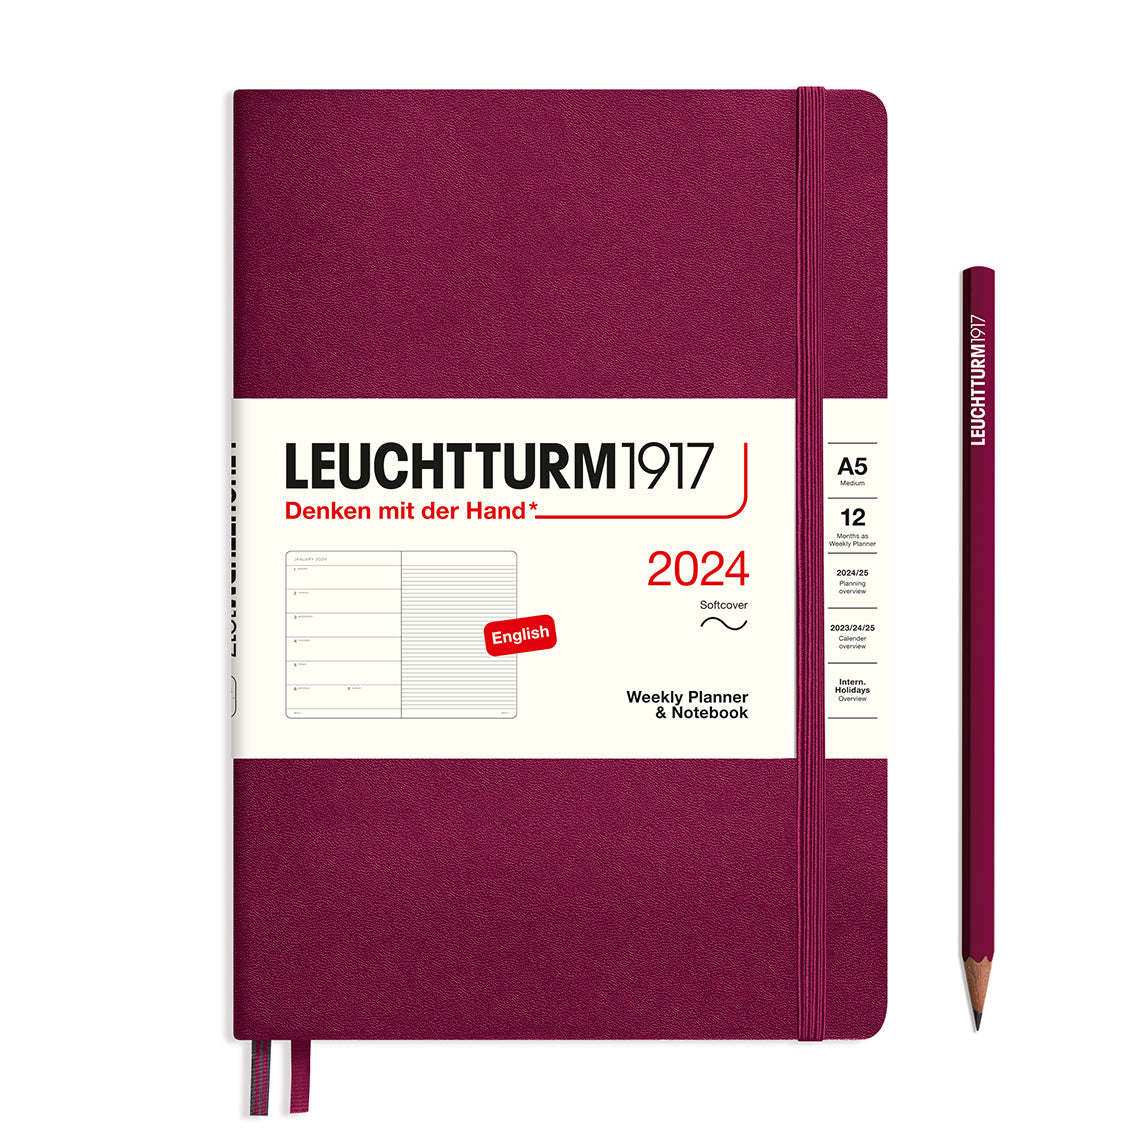 An image of a burgundy planner with a burgundy elastic band holding it together and a cream paper wrap around the middle stating the business name Leuchtturm1917, that it is for the year 2024, it is a weekly planner and notebook, is A5 in size and an English language version. It has an image on the wrap showing the inside layout which is a week on the left hand page and a notes page on thr right hand page. A burgundy pencil is shown at the side of the planner.